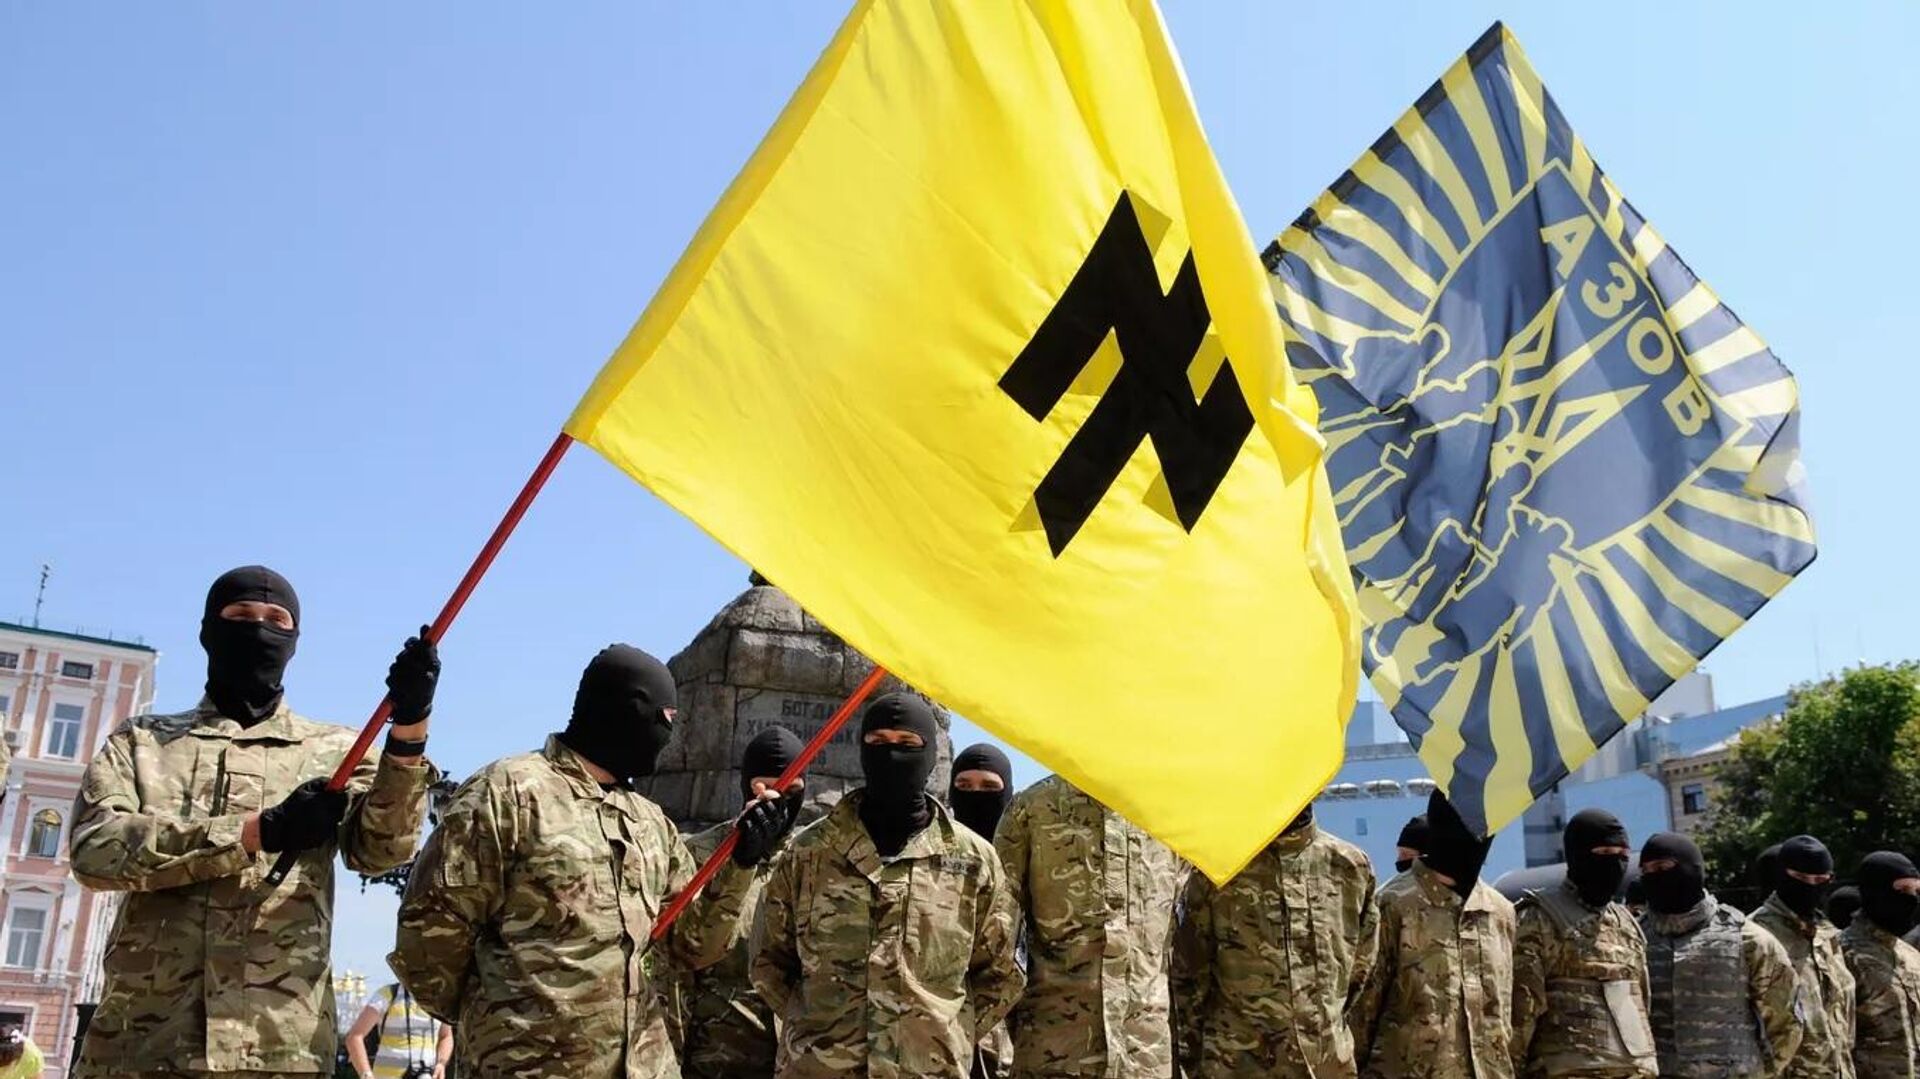 Fighters of the neo-Nazi Azov Battalion take the oath of allegiance to Ukraine in Sophia Square in Kiev before being sent to Donbass. Members of the Nazi battalion have committed hundreds of war crimes against the population of Donbass over eight years. The Azov flag has an inverted image of the runic symbol “Wolfsangel”, which was used by the Nazis. - Sputnik International, 1920, 15.11.2022